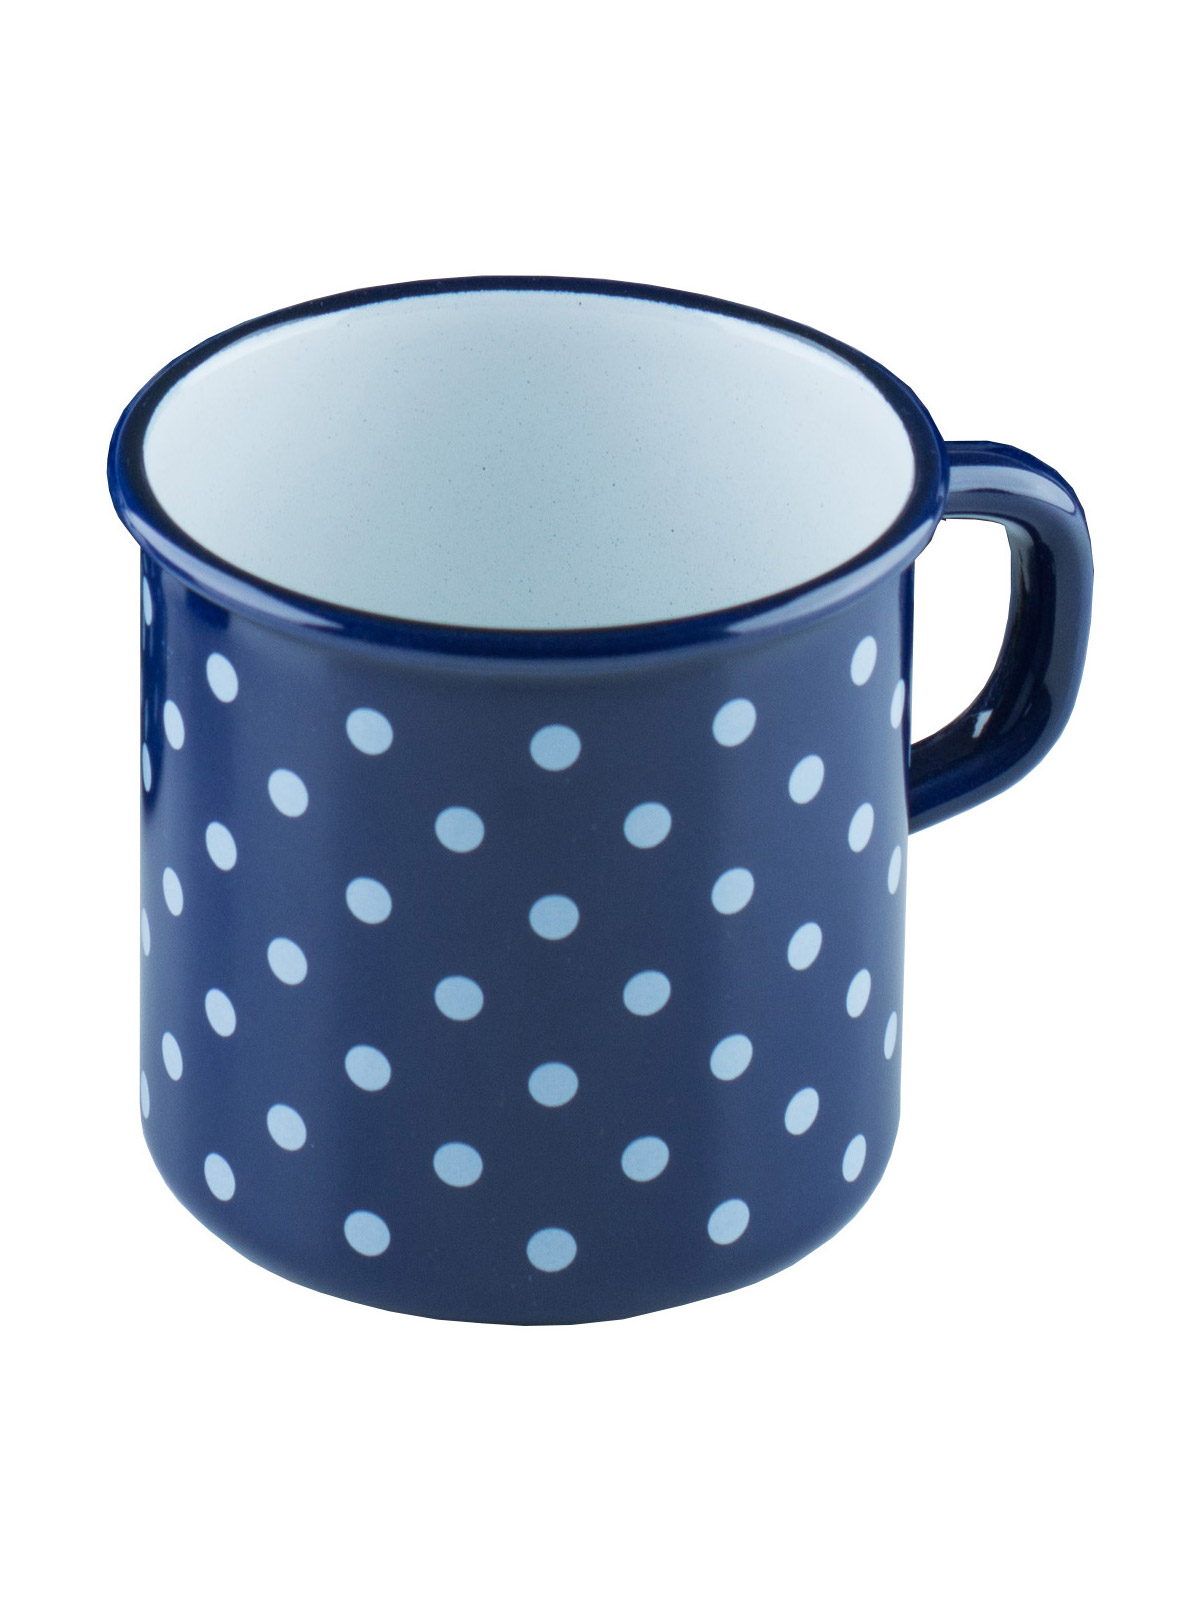 cup blue with dots (0221-75)